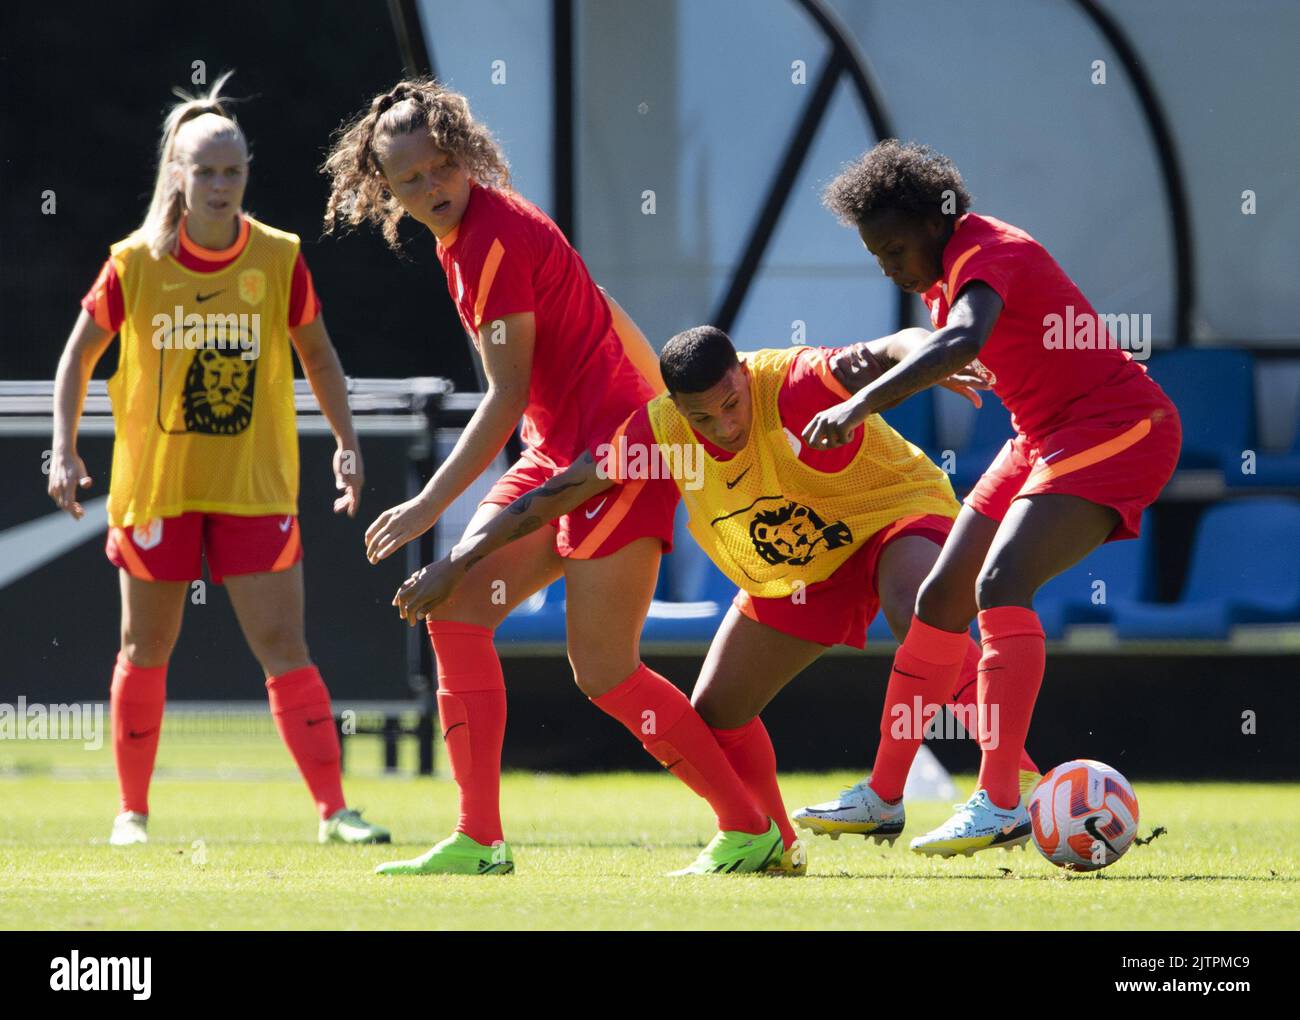 ZEIST - Shanice van de Sande, Fenna Kalma, Lineth Beerensteyn during a training session of the Dutch women's national team. The Orange Lionesses are preparing for the friendly match against Scotland. ANP OLAF KRAAK Stock Photo